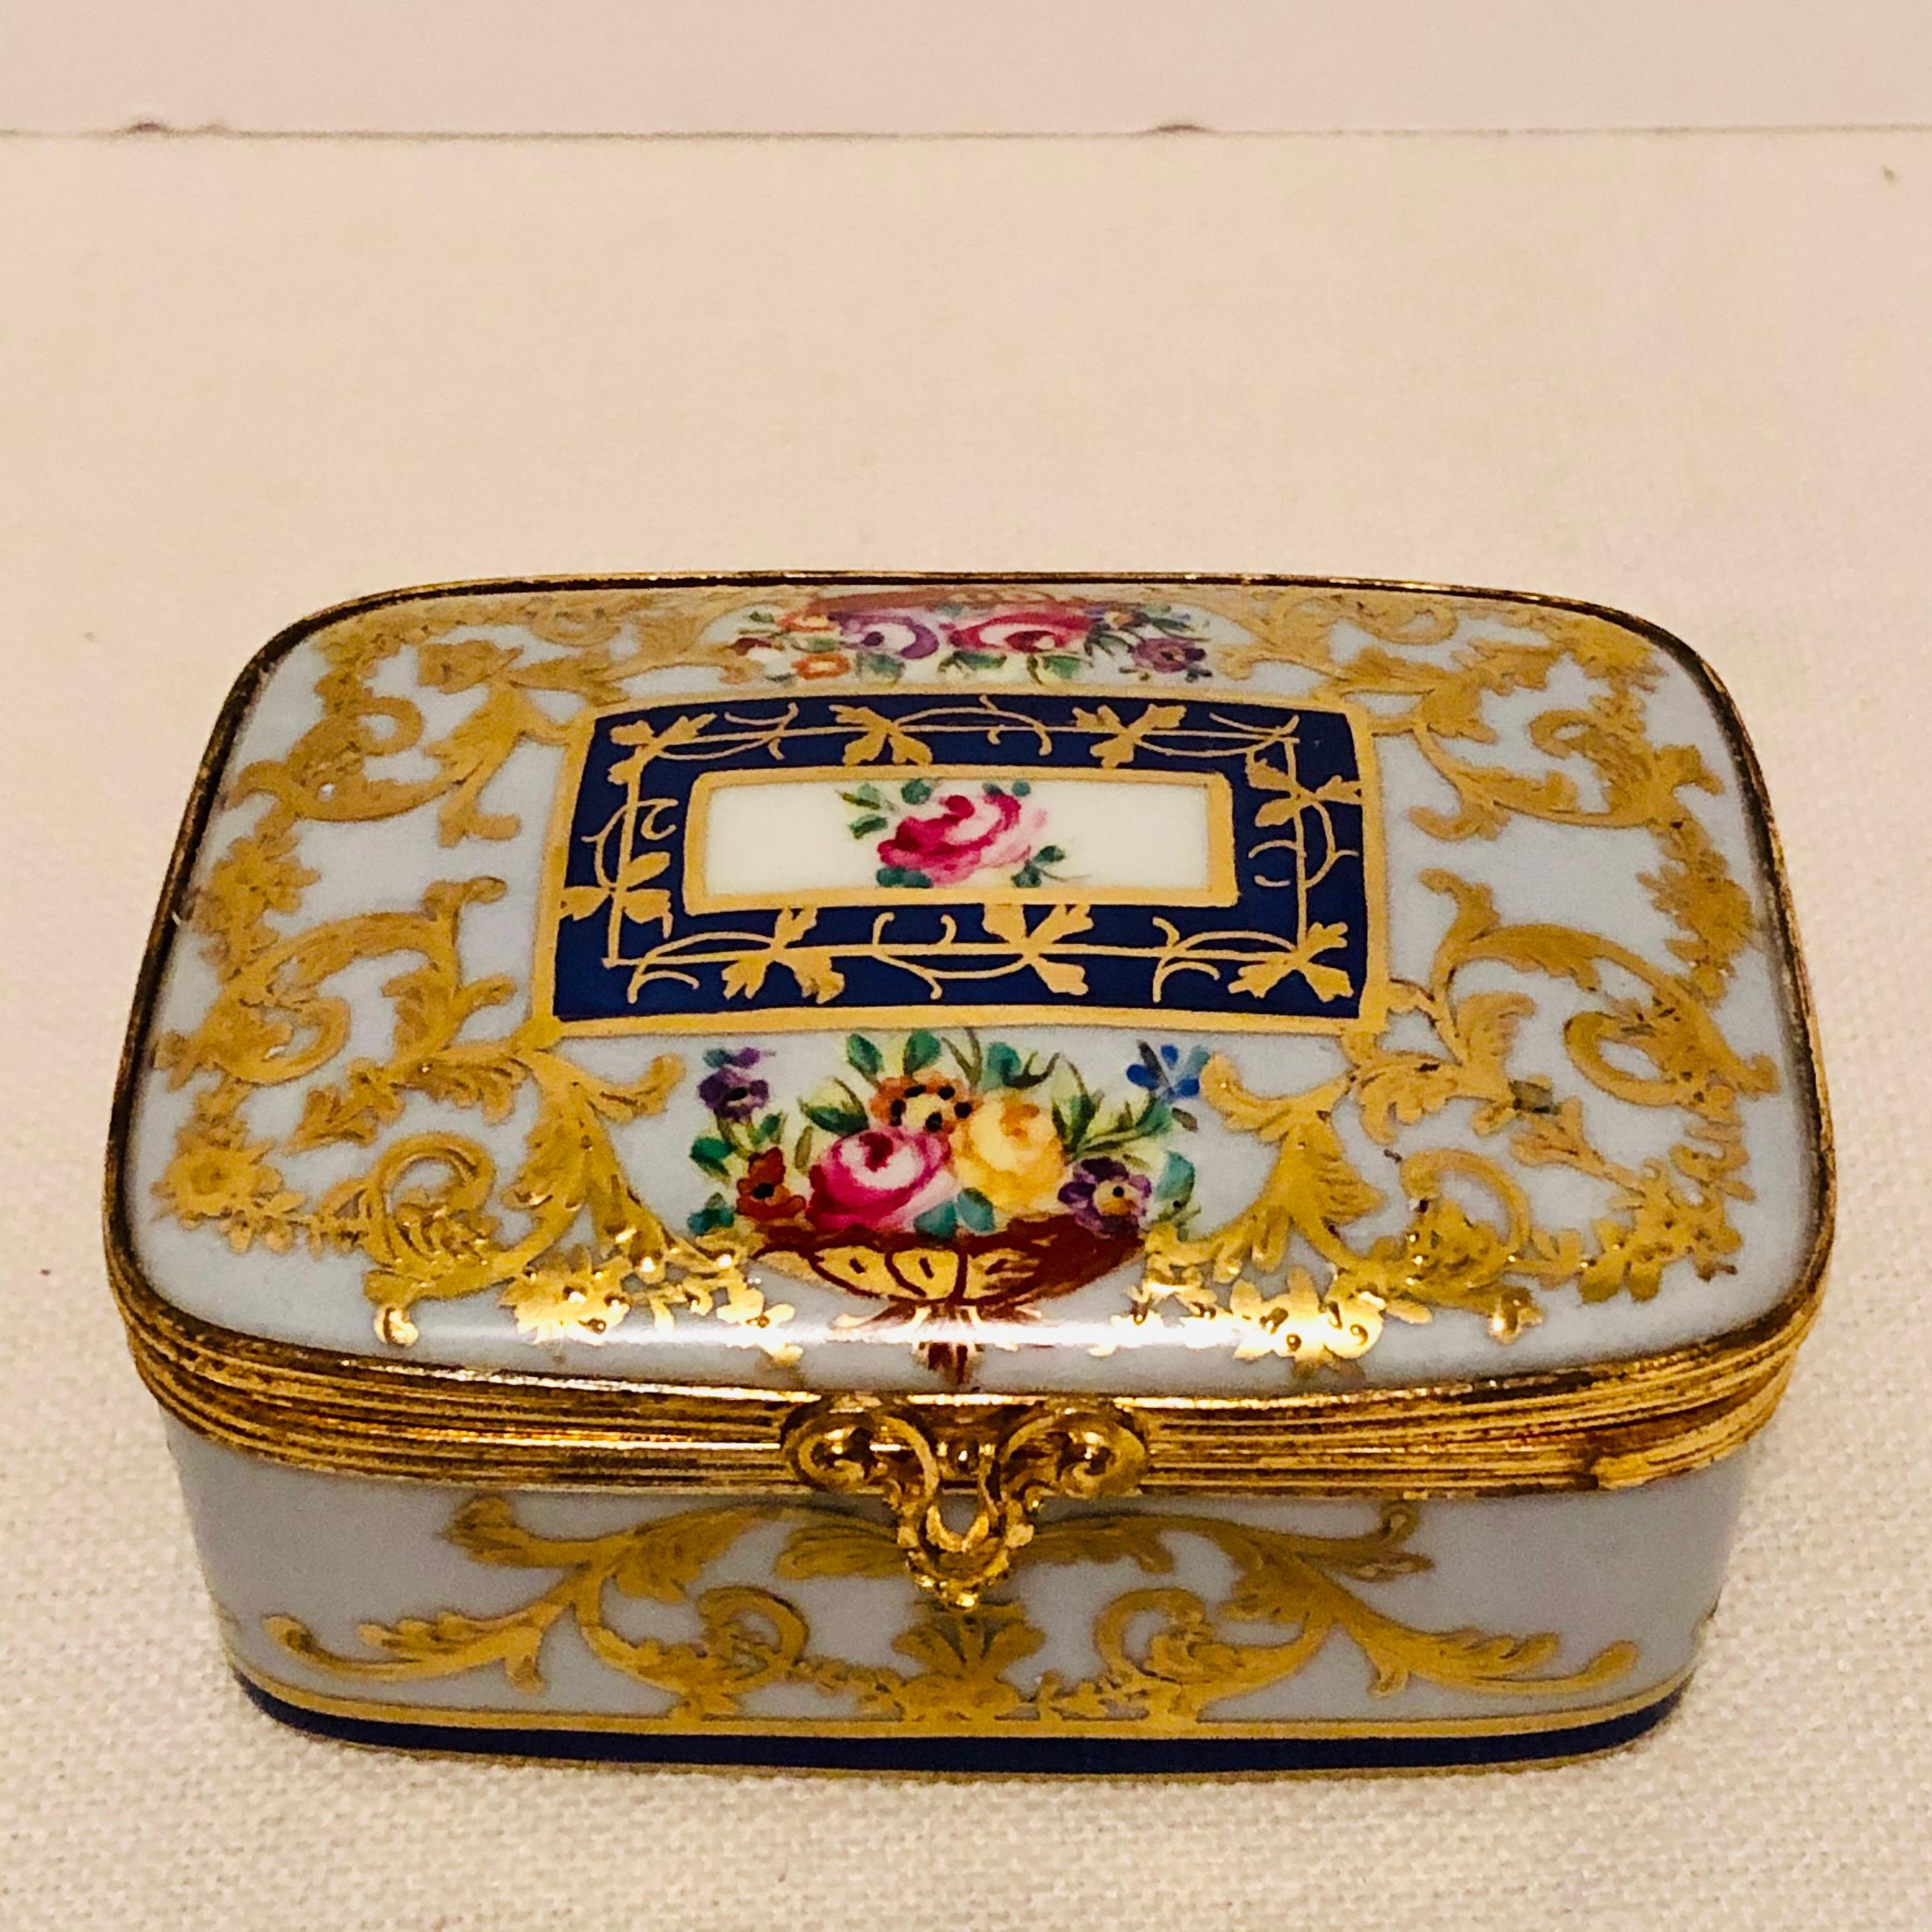 This is an exquisite Le Tallec porcelain box with a light blue background color. It is decorated with two flower bouquets and an arabesque of intricate raised gilding on every side. It has an accent of a cobalt colored square with raised gilding in